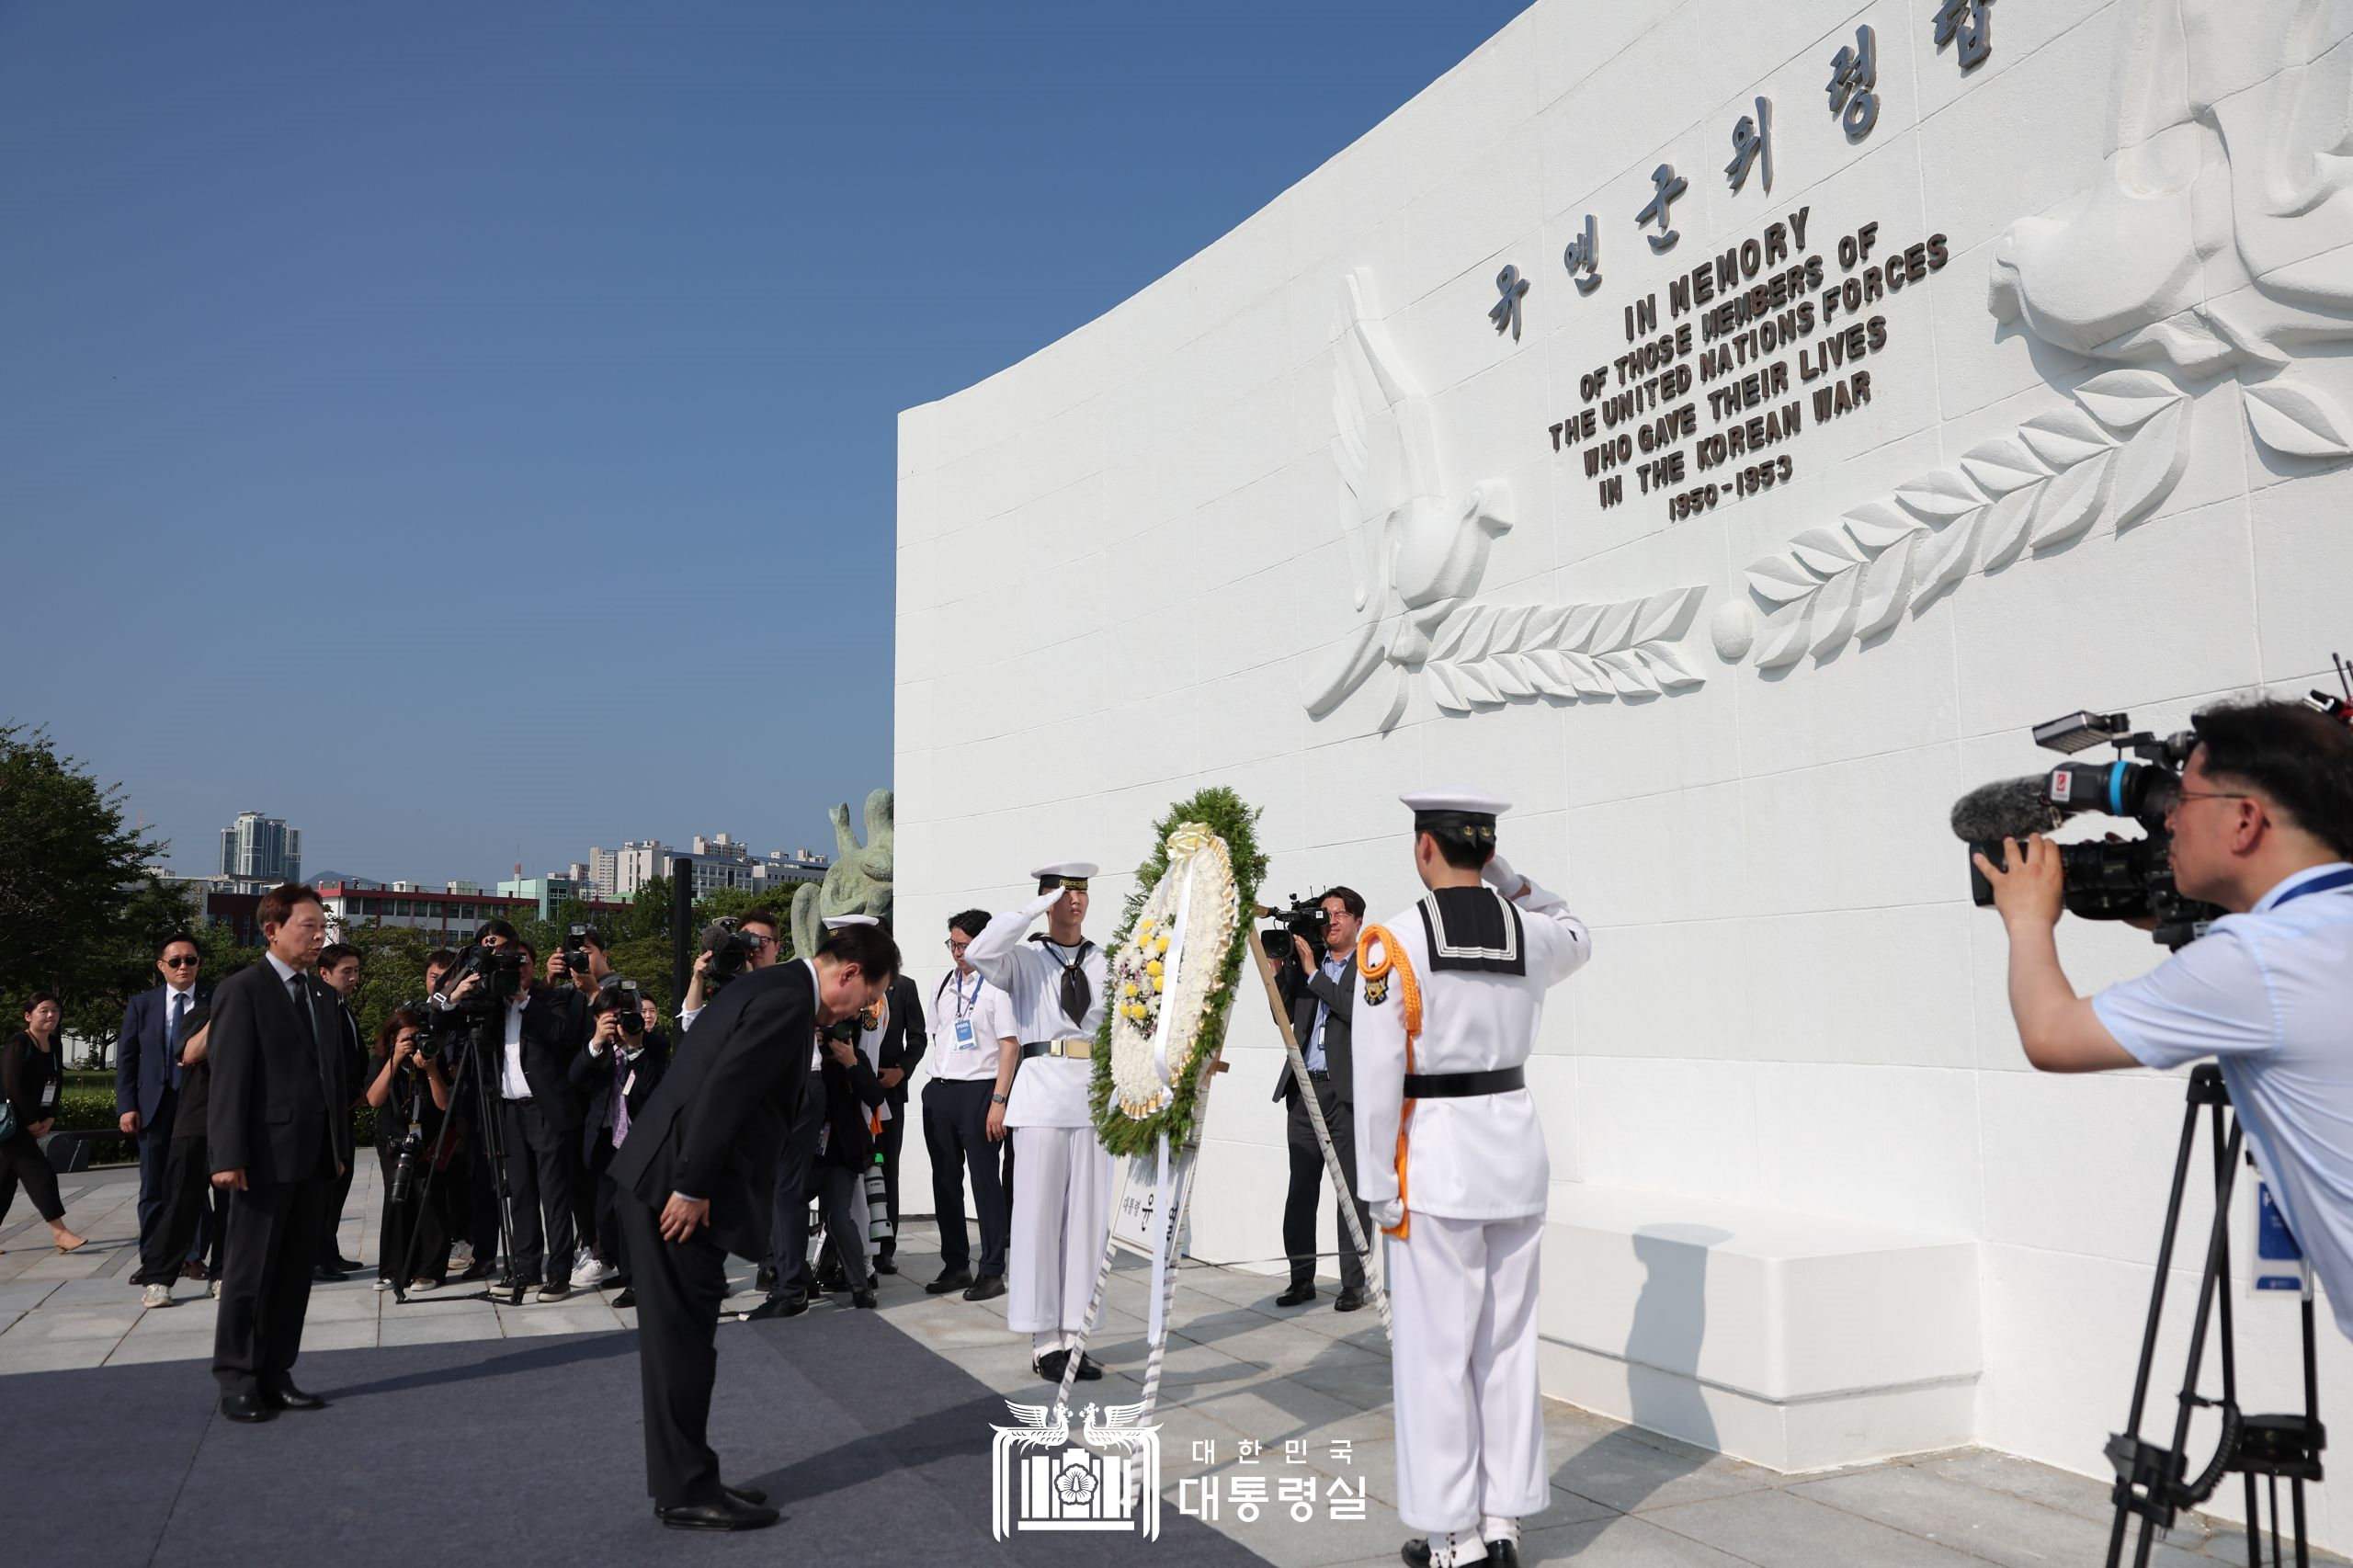 On the 70th anniversary of the Korean War Armistice Agreement, President Yoon paid tribute to fallen UN soldiers